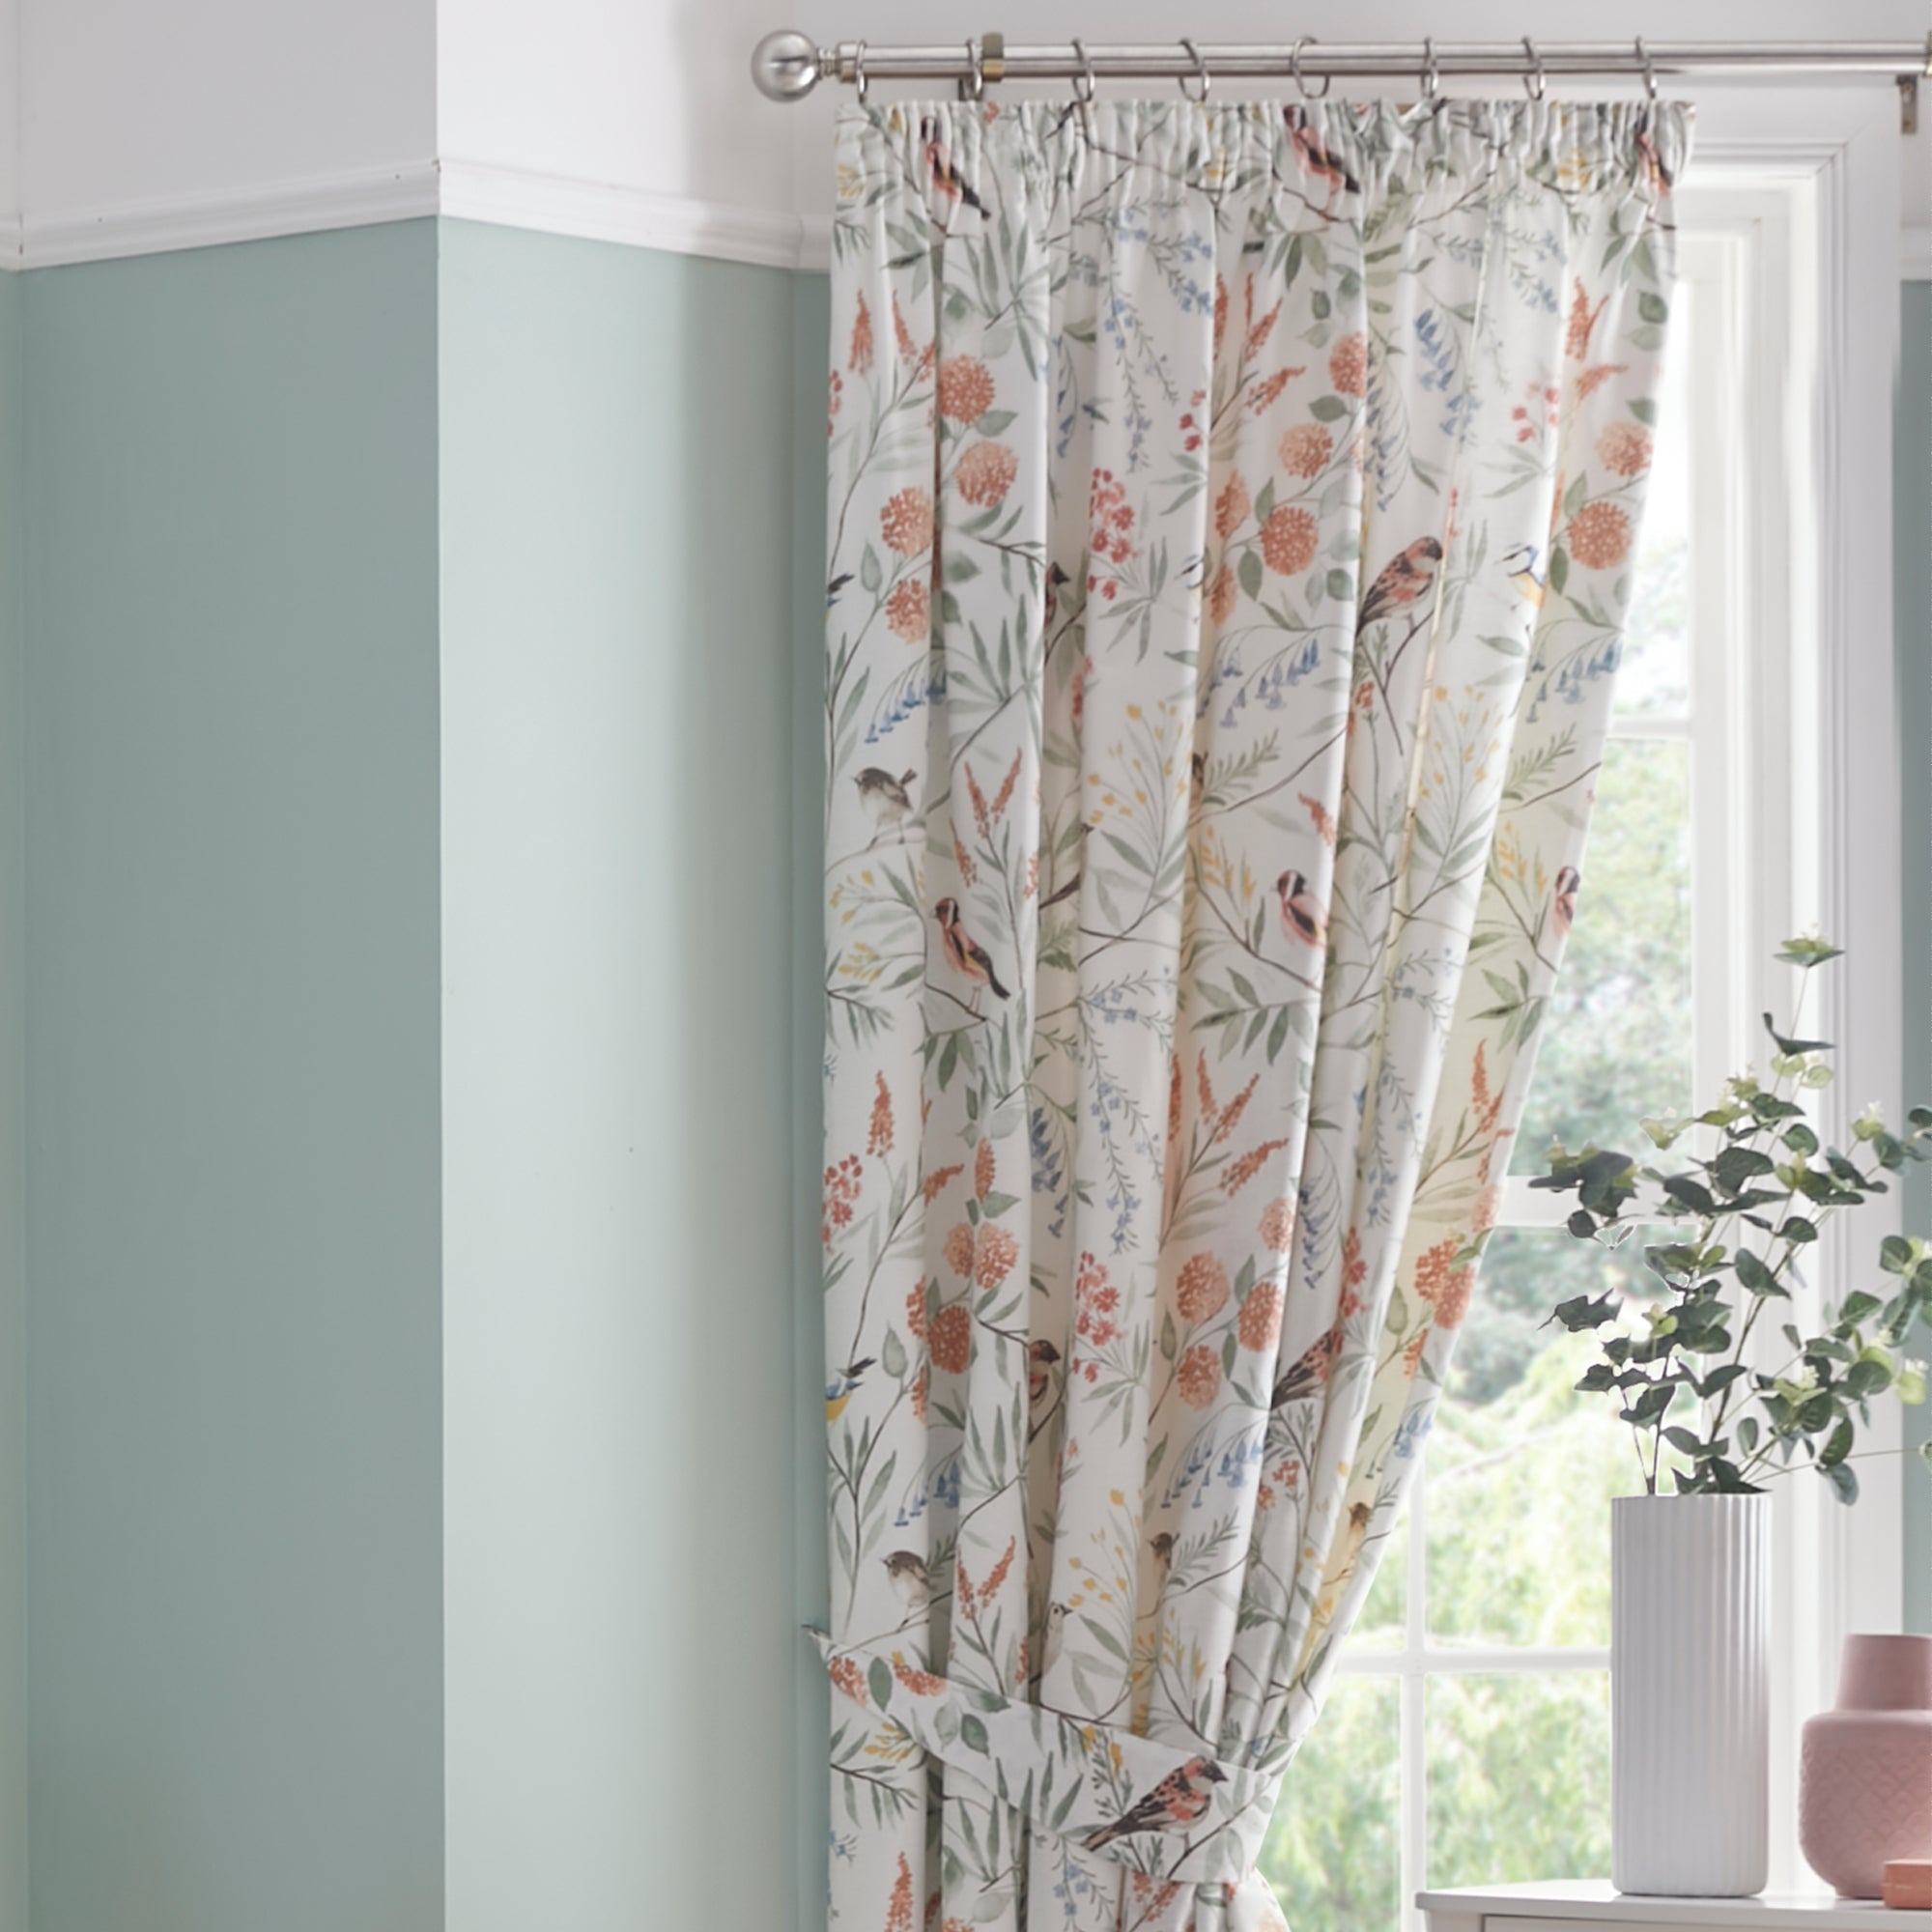 Pair of Pencil Pleat Curtains With Tie-Backs Caraway by D&D Design in Terracotta